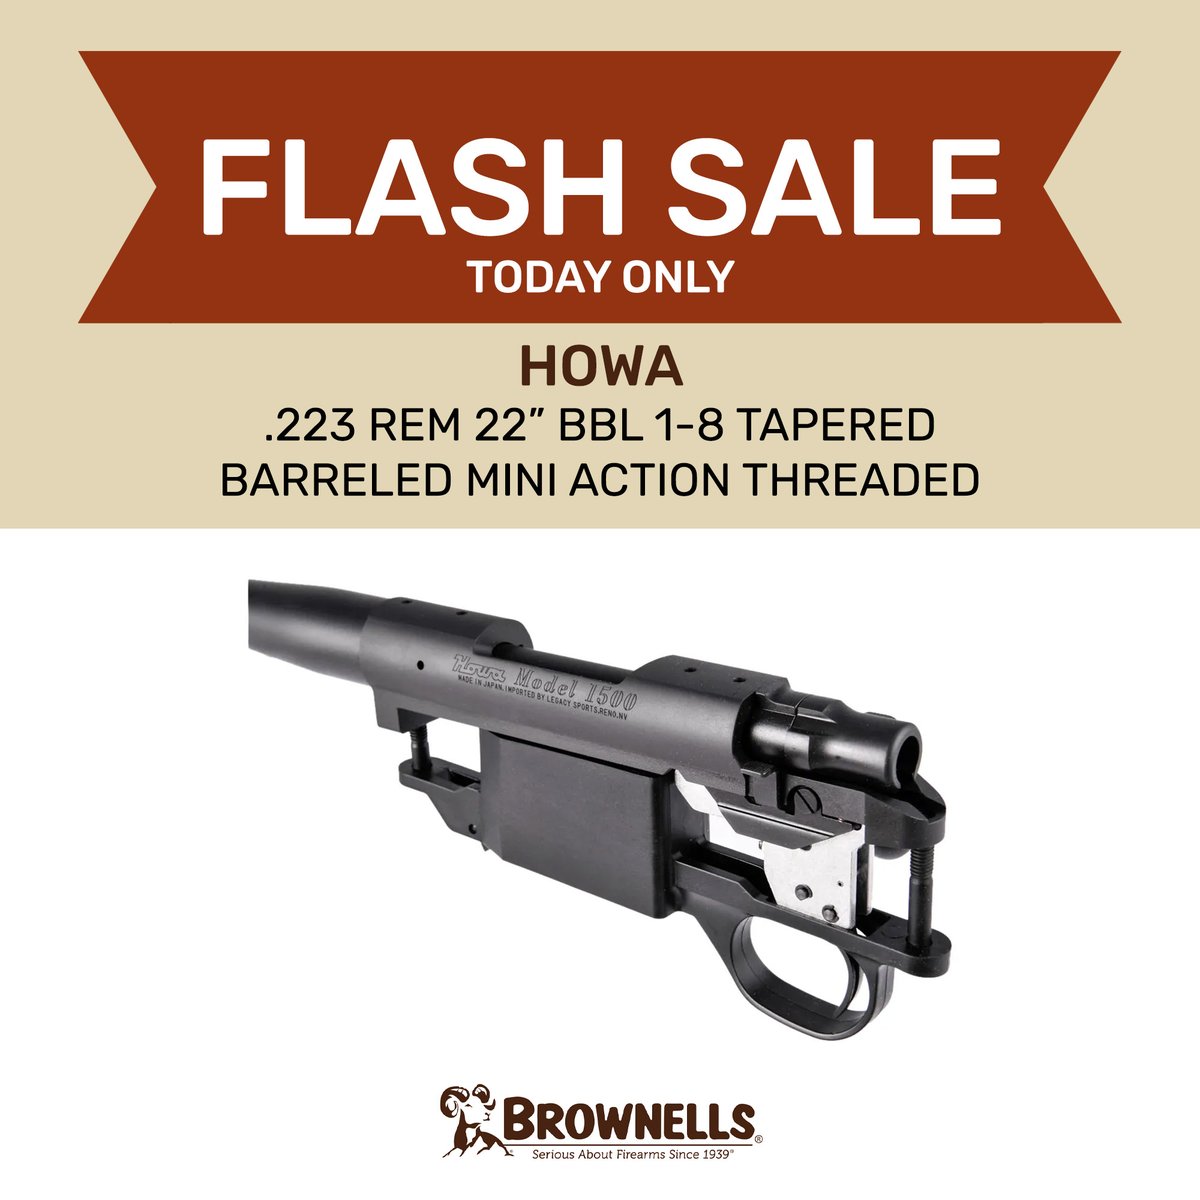 FLASH SALE TODAY ONLY- Howa .223 Rem 22' BBL 1-8 Tapered Barreled Mini Action Threaded. More at brownells.com/gun-parts/rifl…